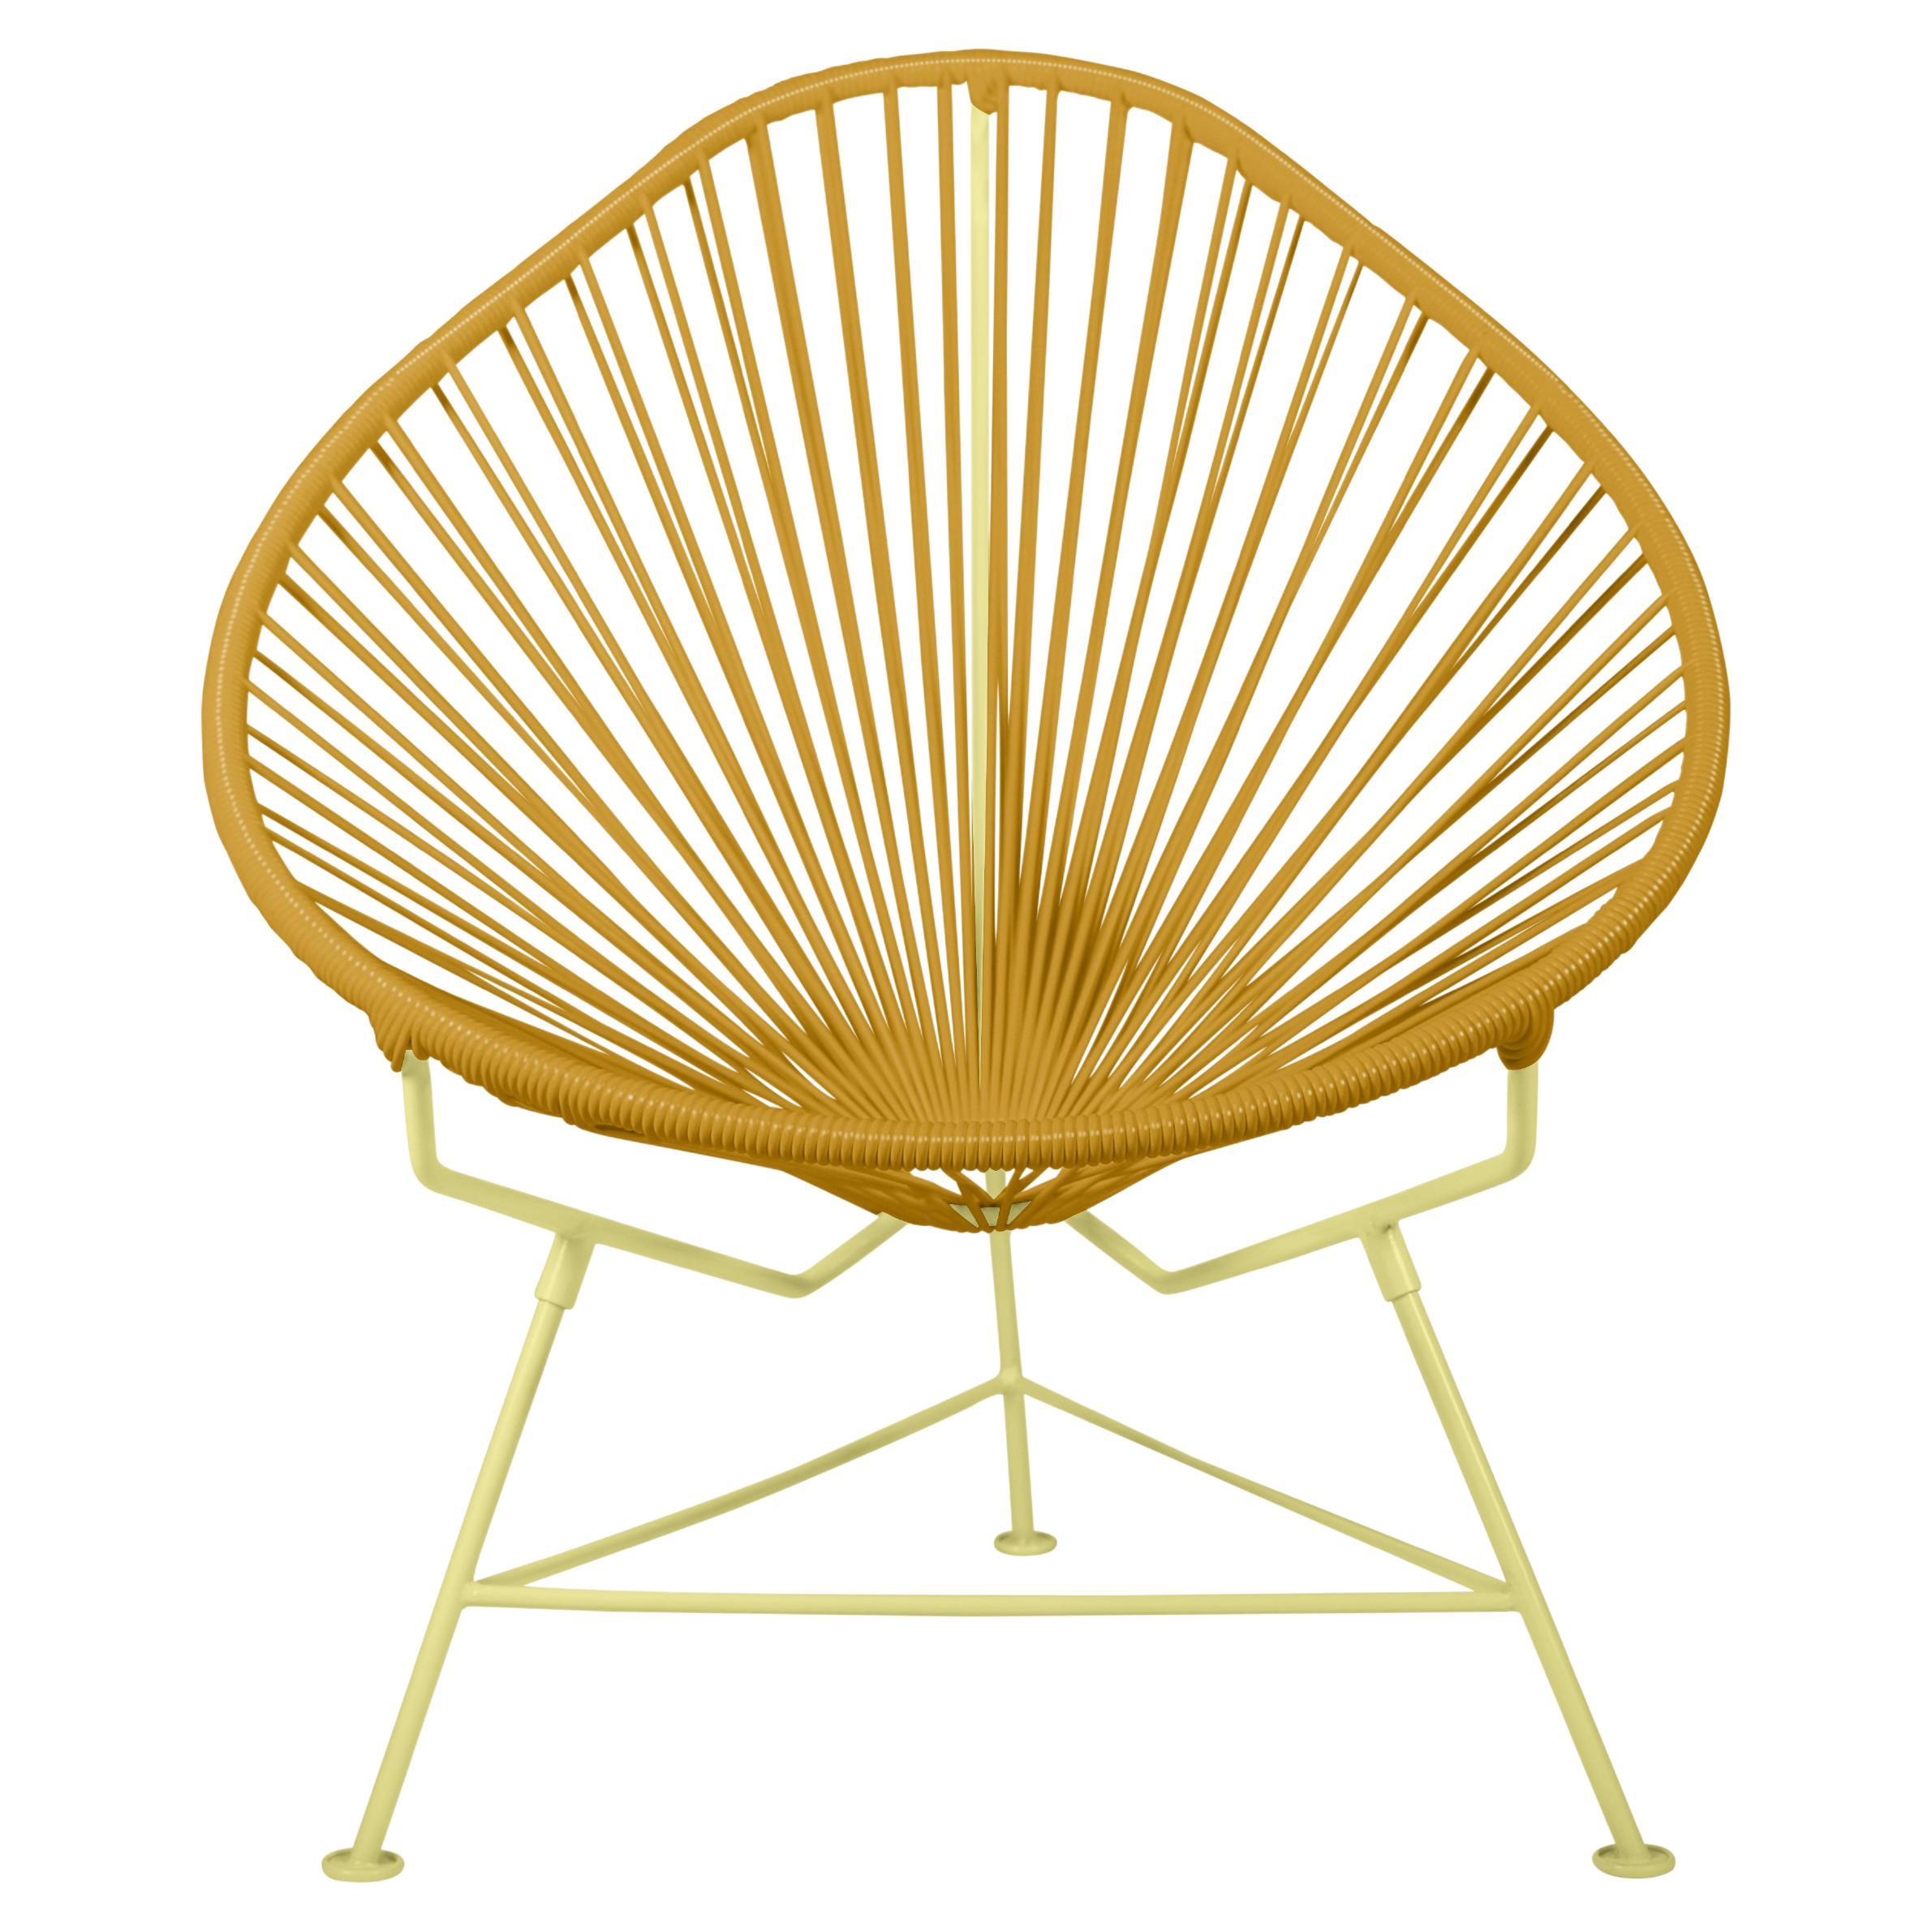 Innit Designs Acapulco Chair Caramel Weave on Yellow Frame For Sale